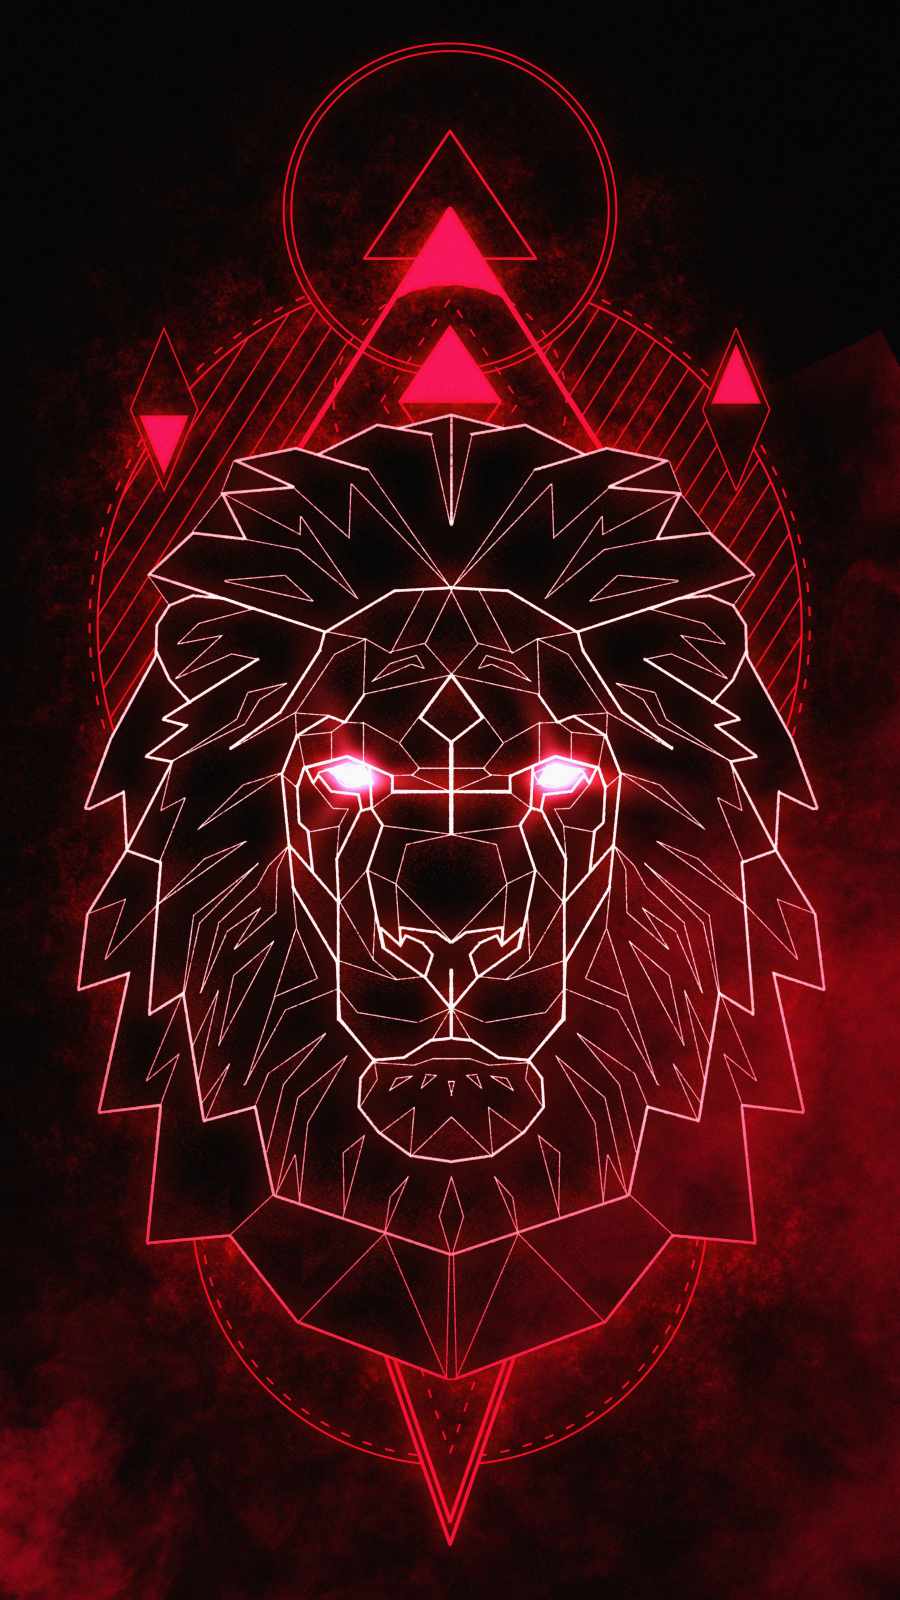 Polygon Lion IPhone Wallpaper - IPhone Wallpapers : iPhone Wallpapers